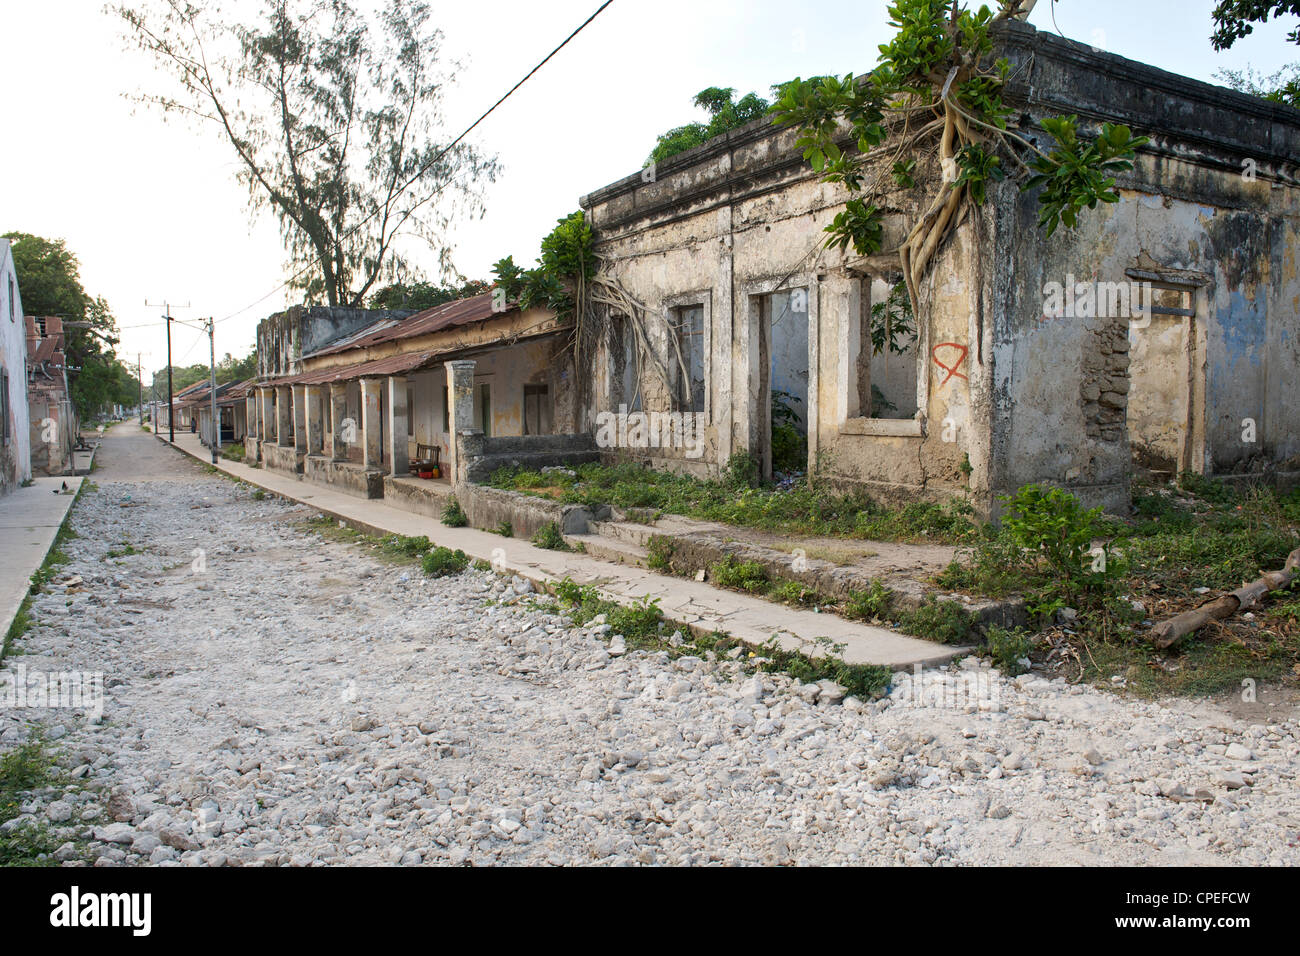 Colonial remains of India Street in Ibo on Ibo island in the Quirimbas archipelago off the coast of Mozambique. Stock Photo